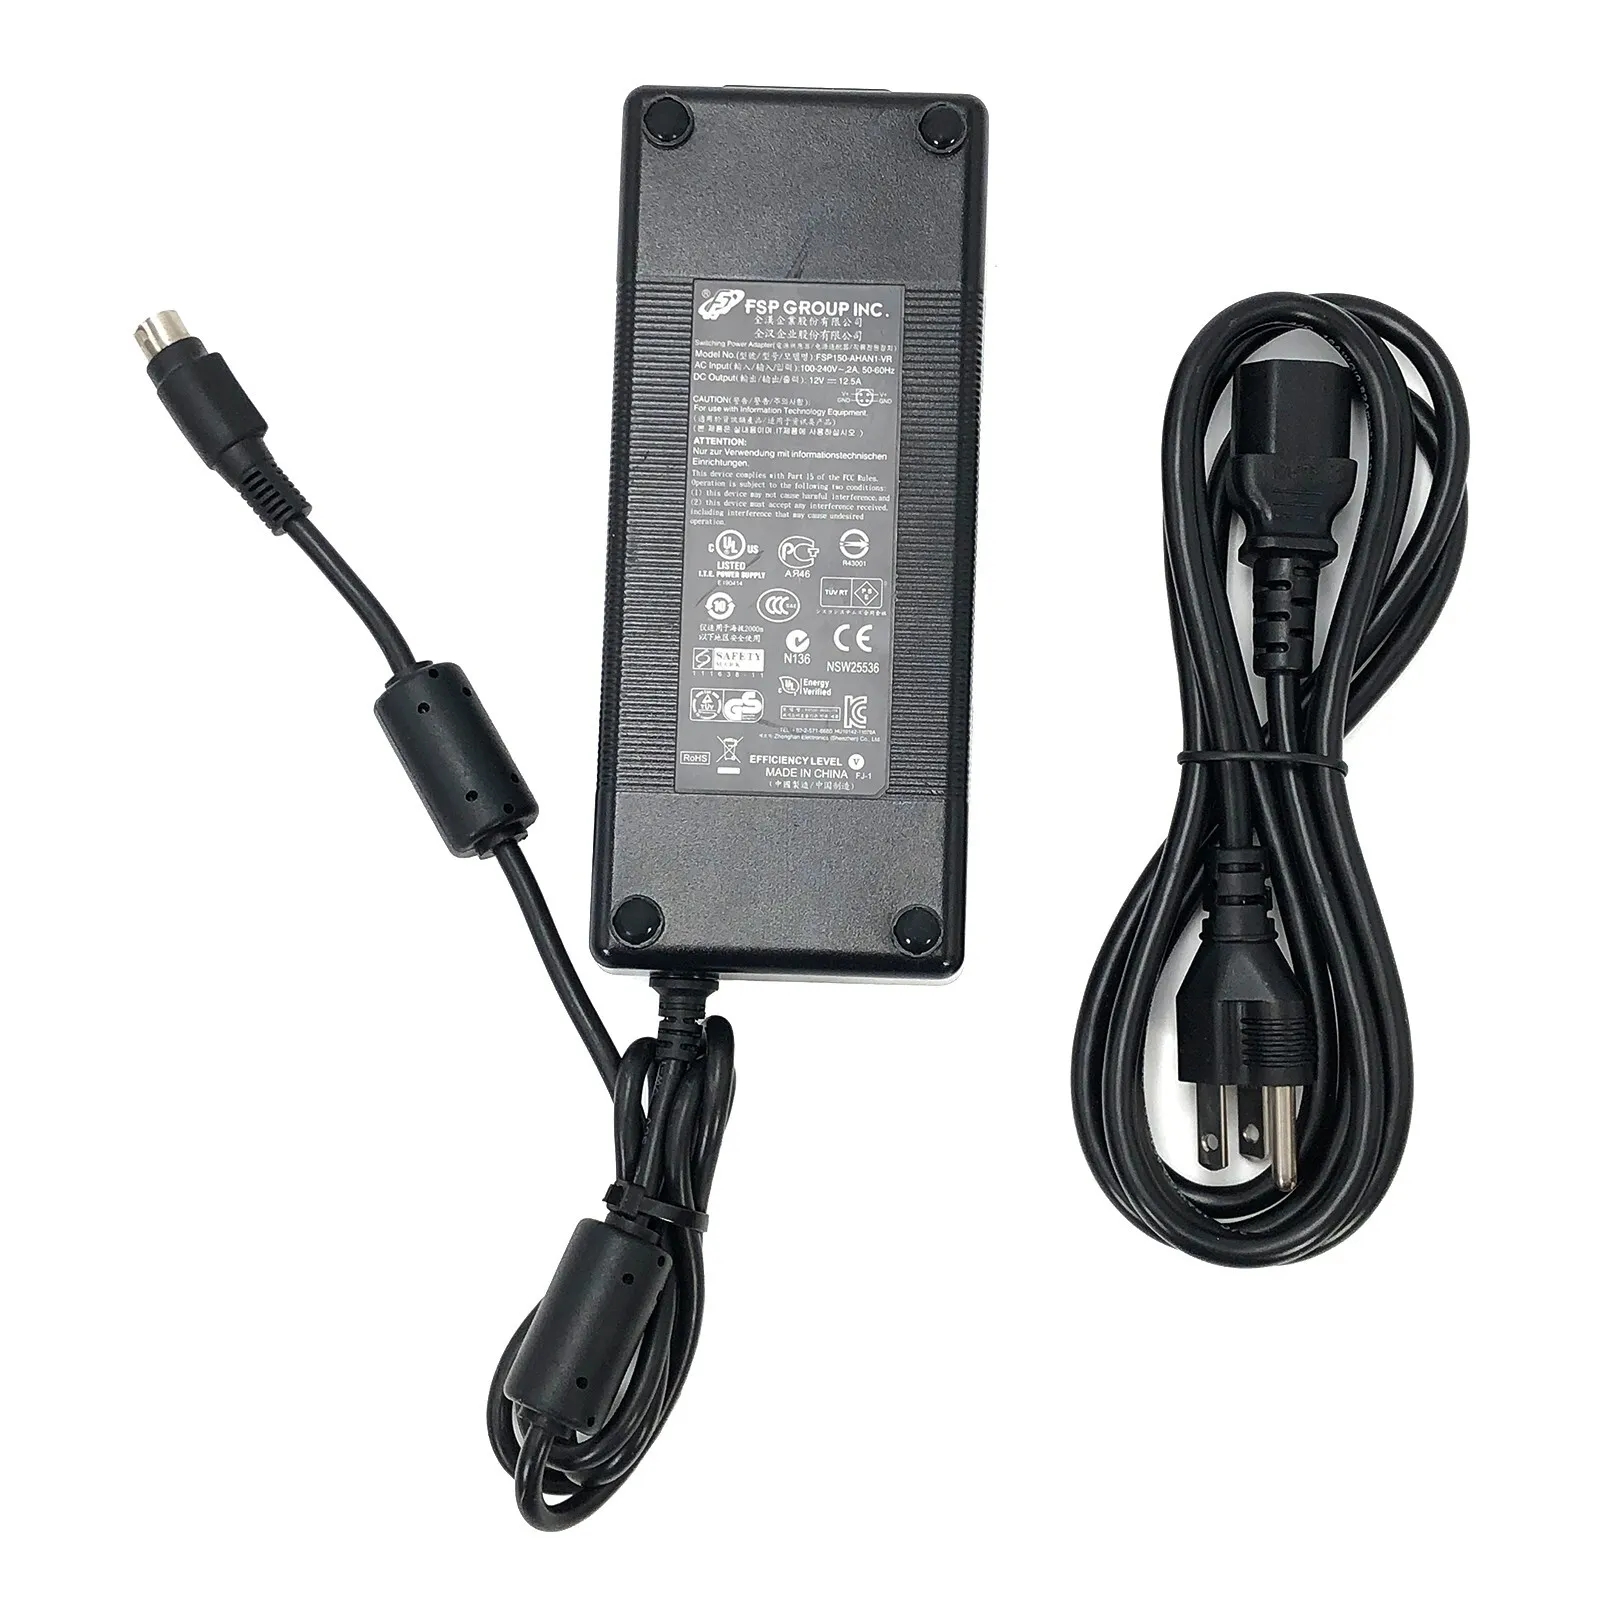 *Brand NEW*FSP 4-PIN 12V 12.5A 150W AC Adapter for Synology DS415+ DS415play DS416 DS416play DS416j Power Supp